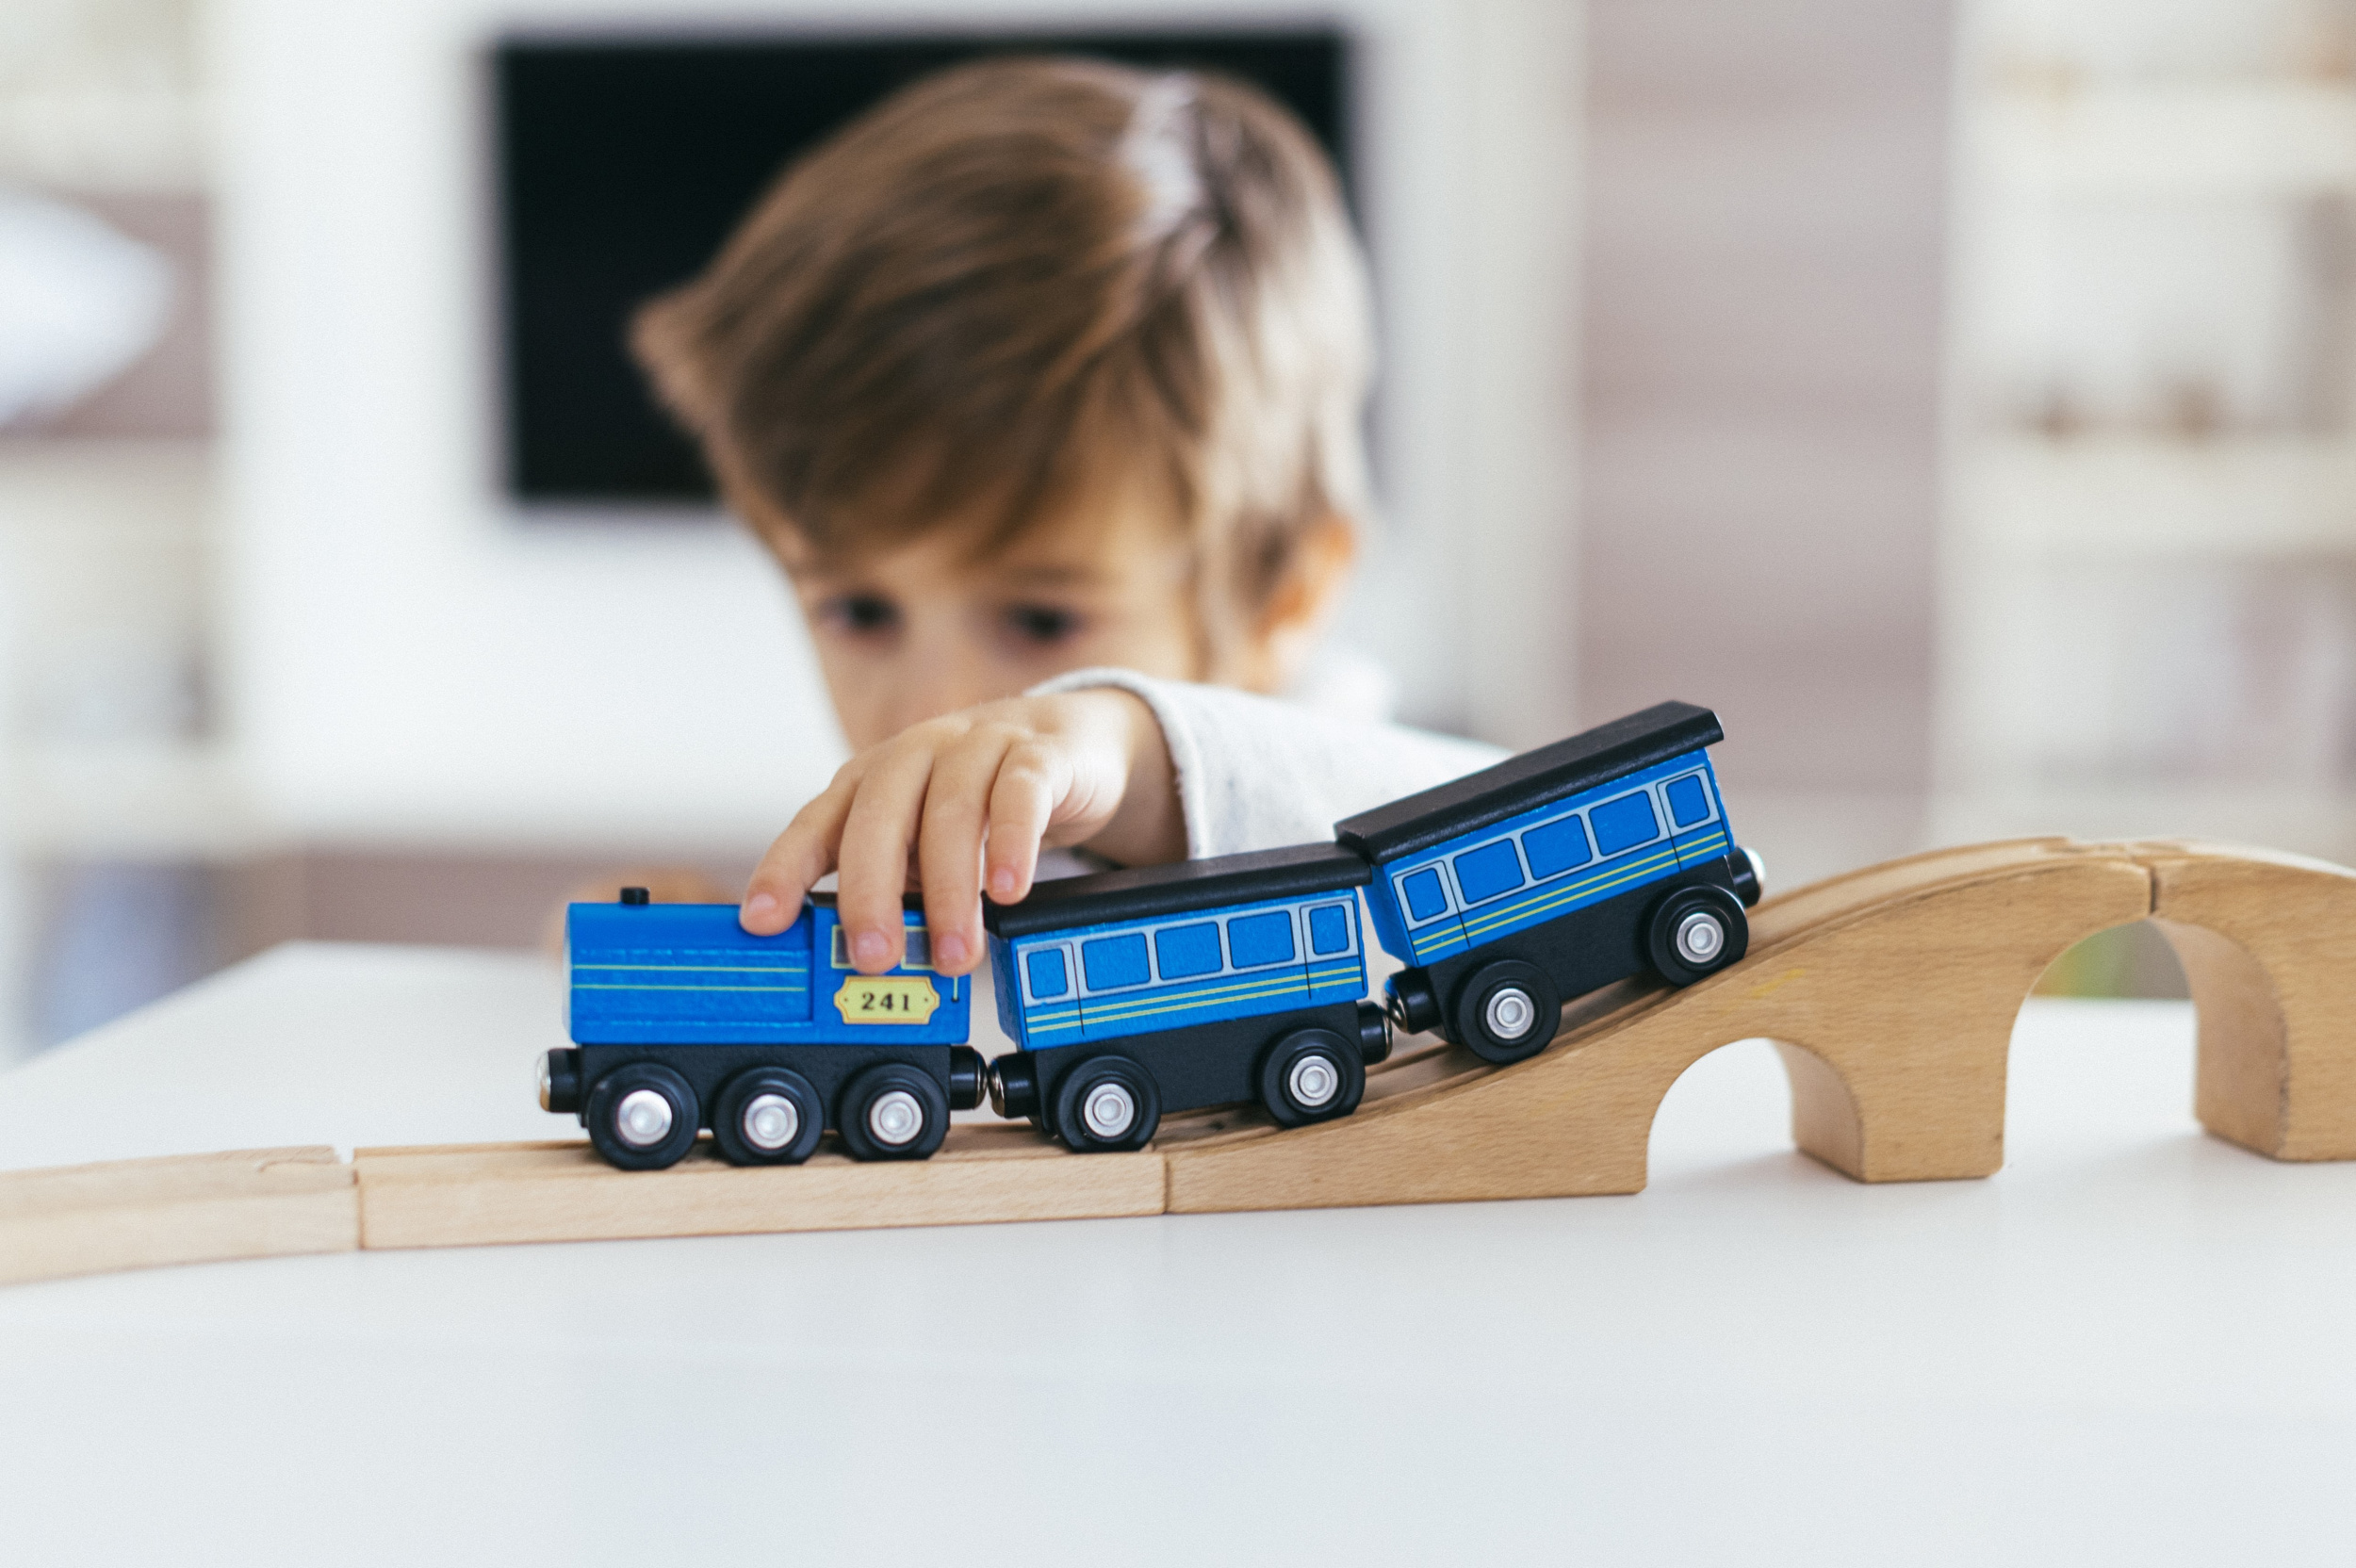 6 kid-playing-with-toy-train.jpg